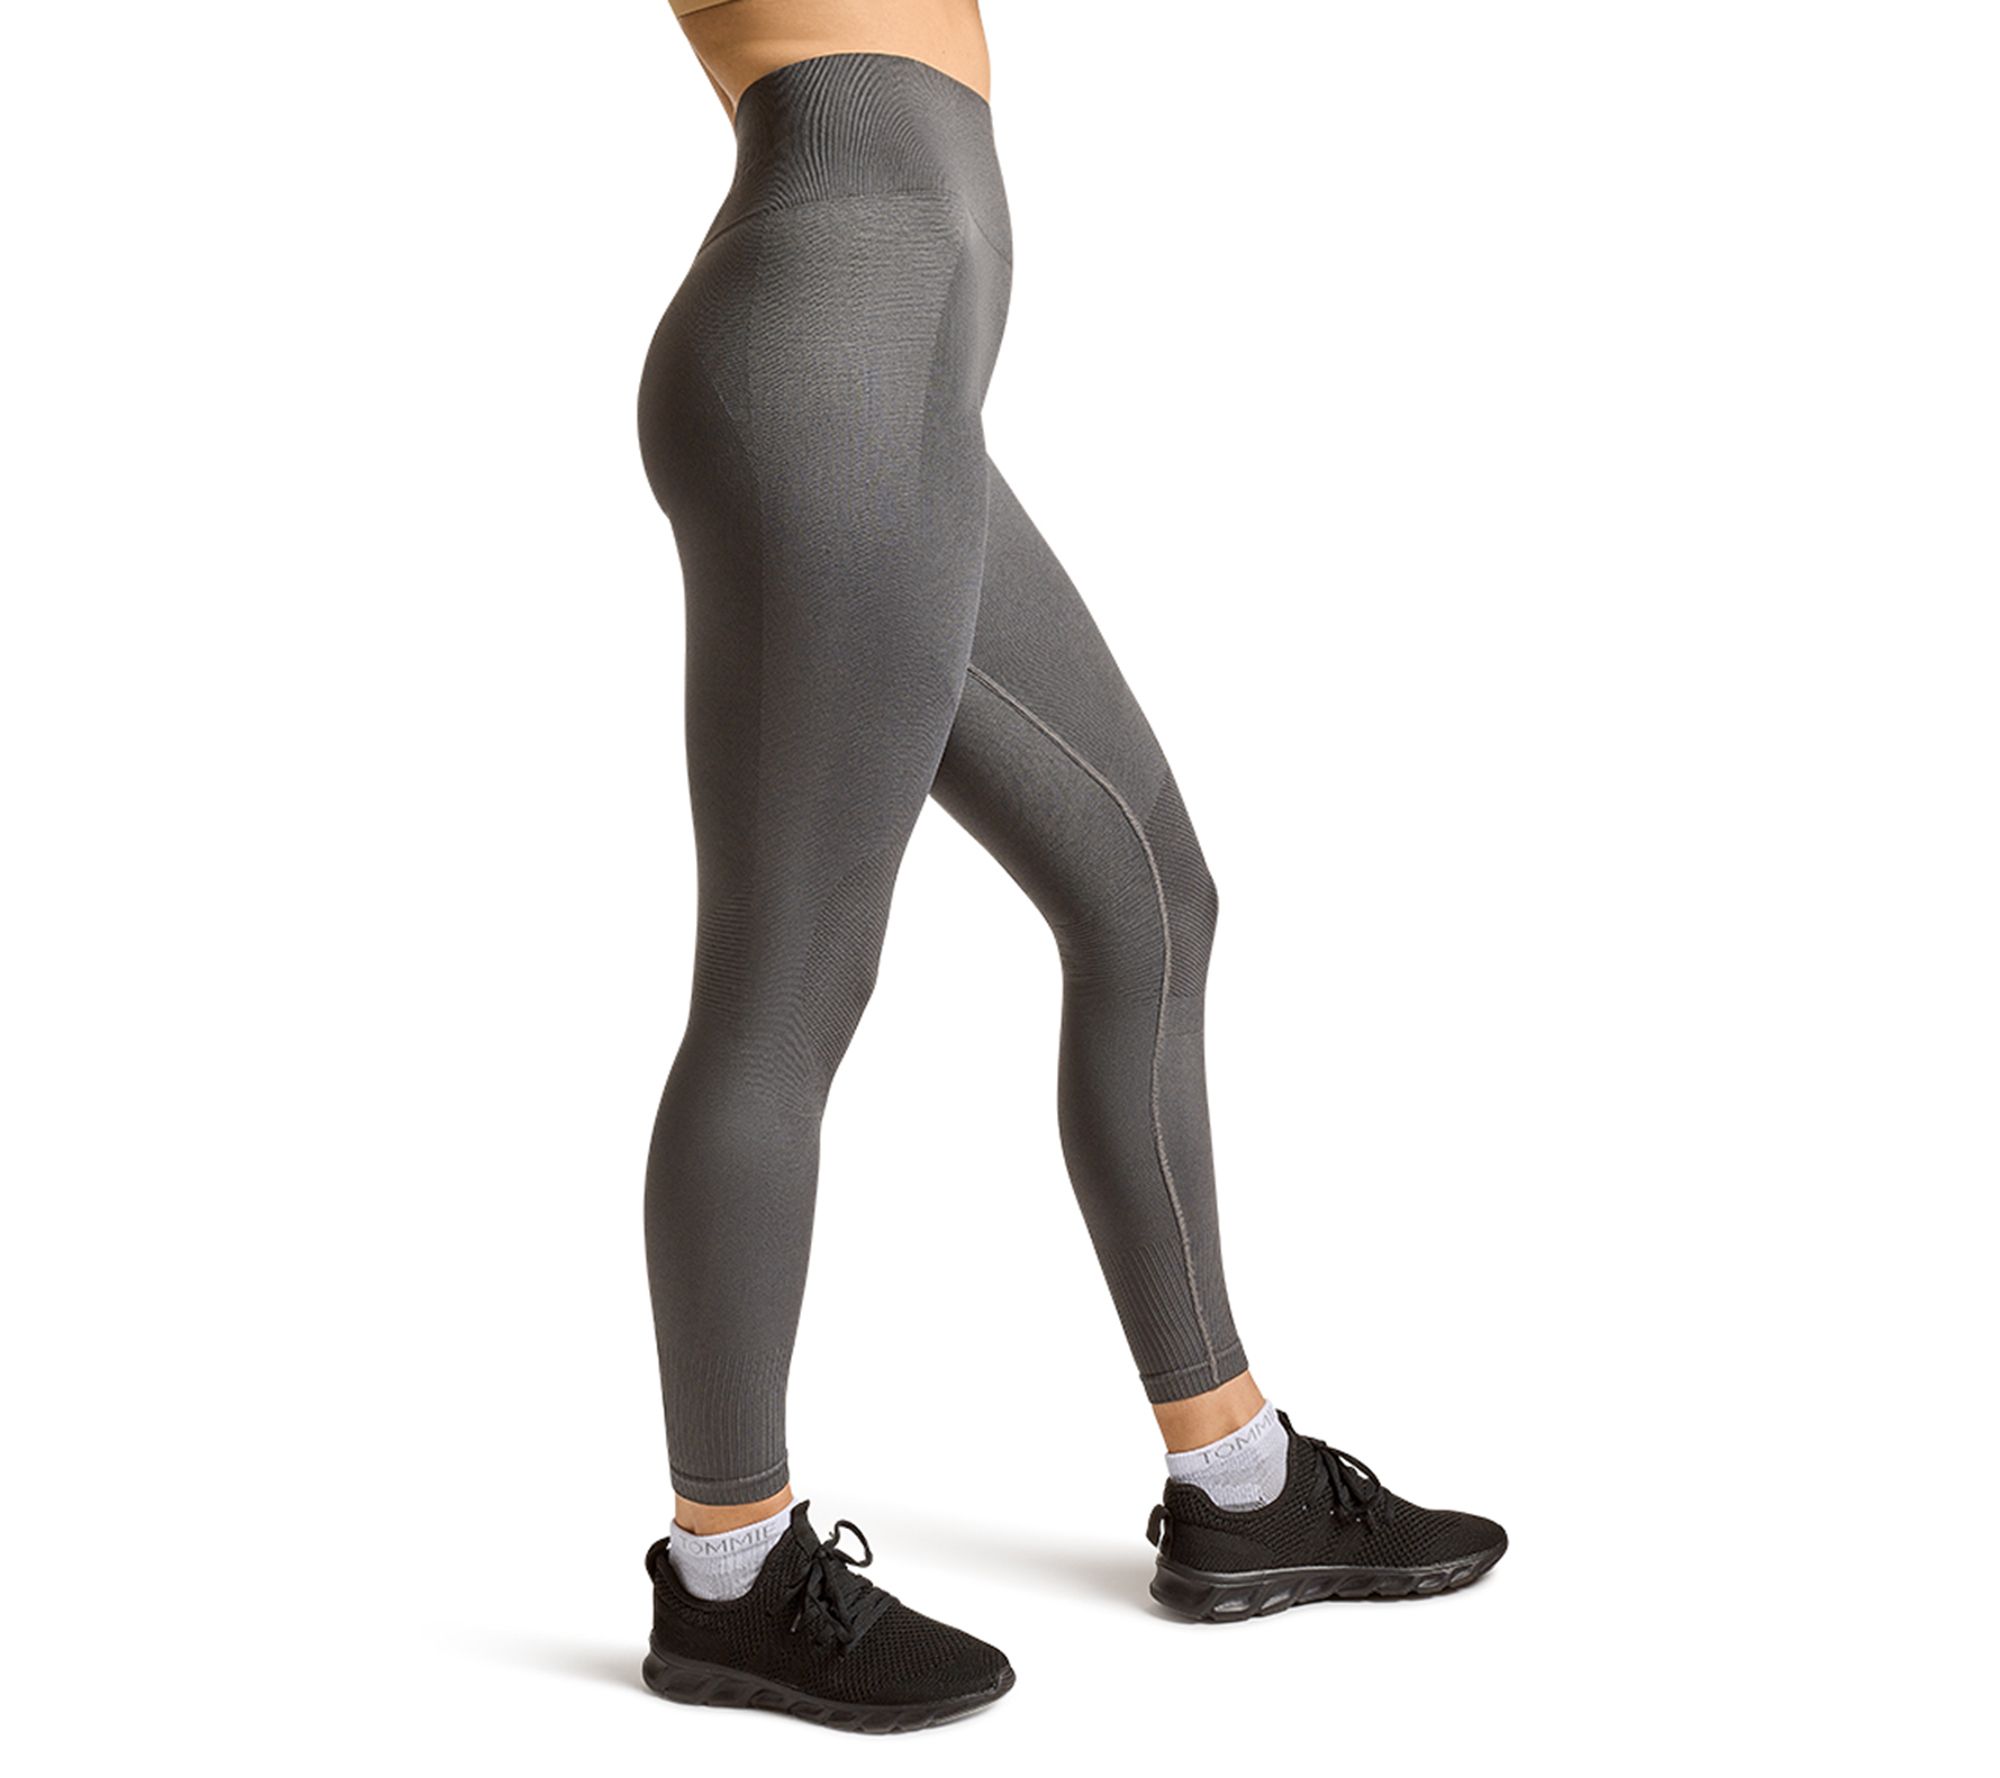 Tommie Copper Seamless Compression Leggings